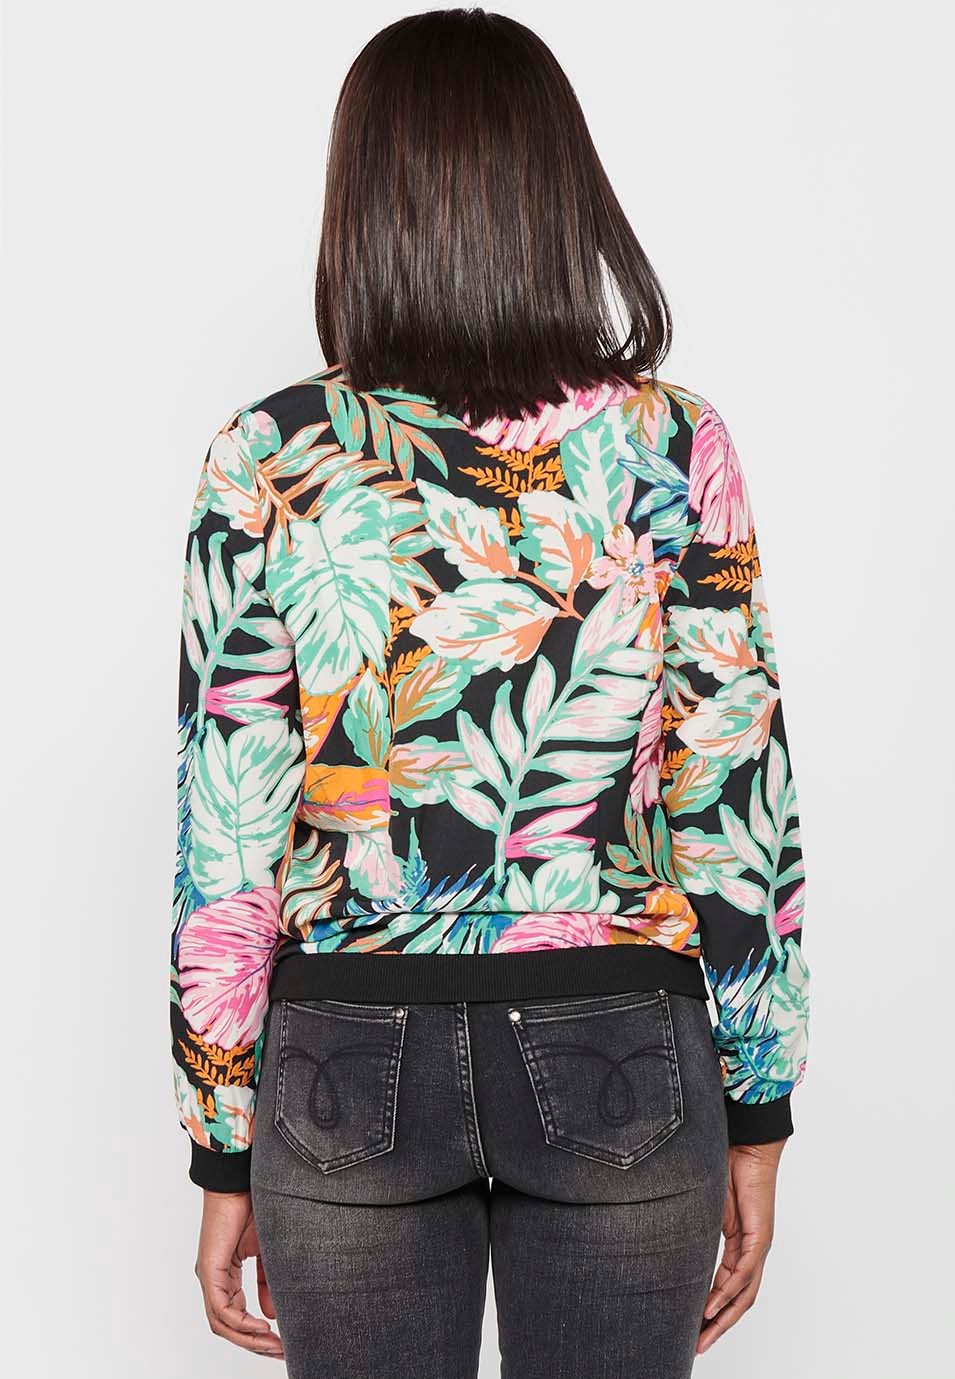 Long-sleeved sweatshirt jacket with ribbed finishes and floral print with front zipper closure. Composition 100% Polyester. Multicolor Color for Women from the Koröshi brand 7